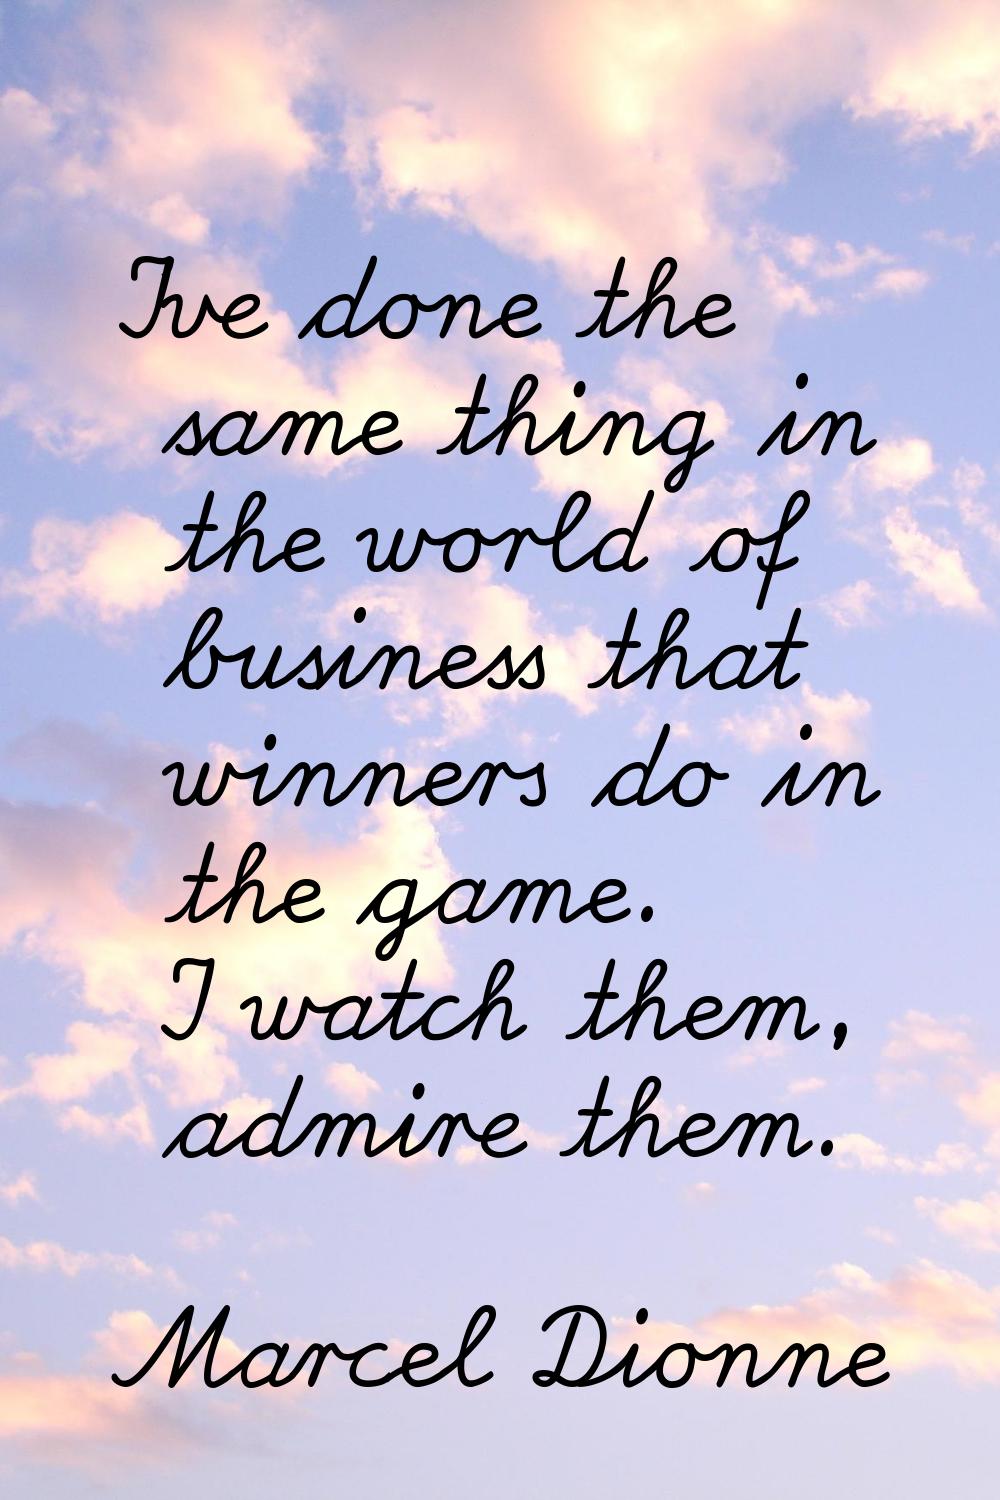 I've done the same thing in the world of business that winners do in the game. I watch them, admire